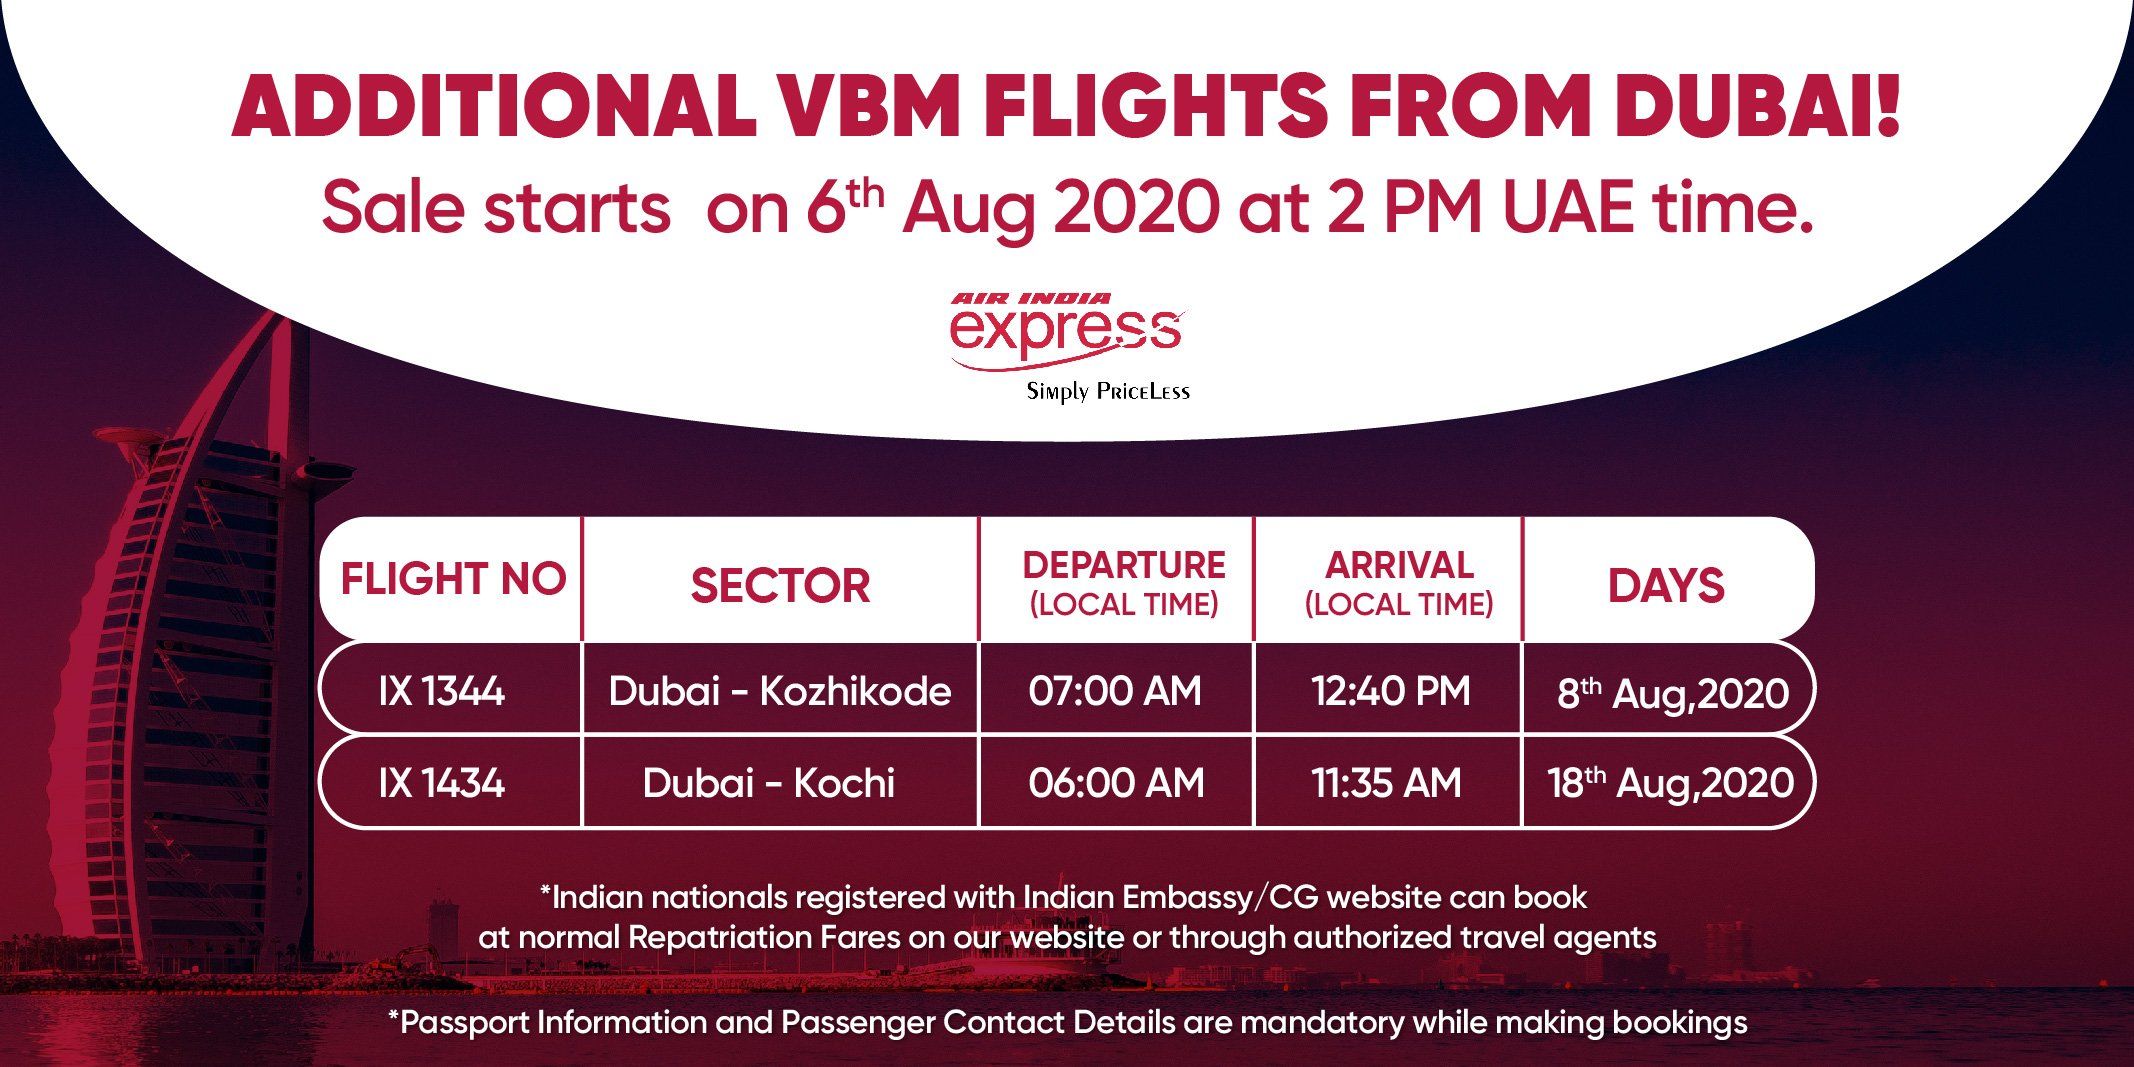 air india express travel guidelines to sharjah